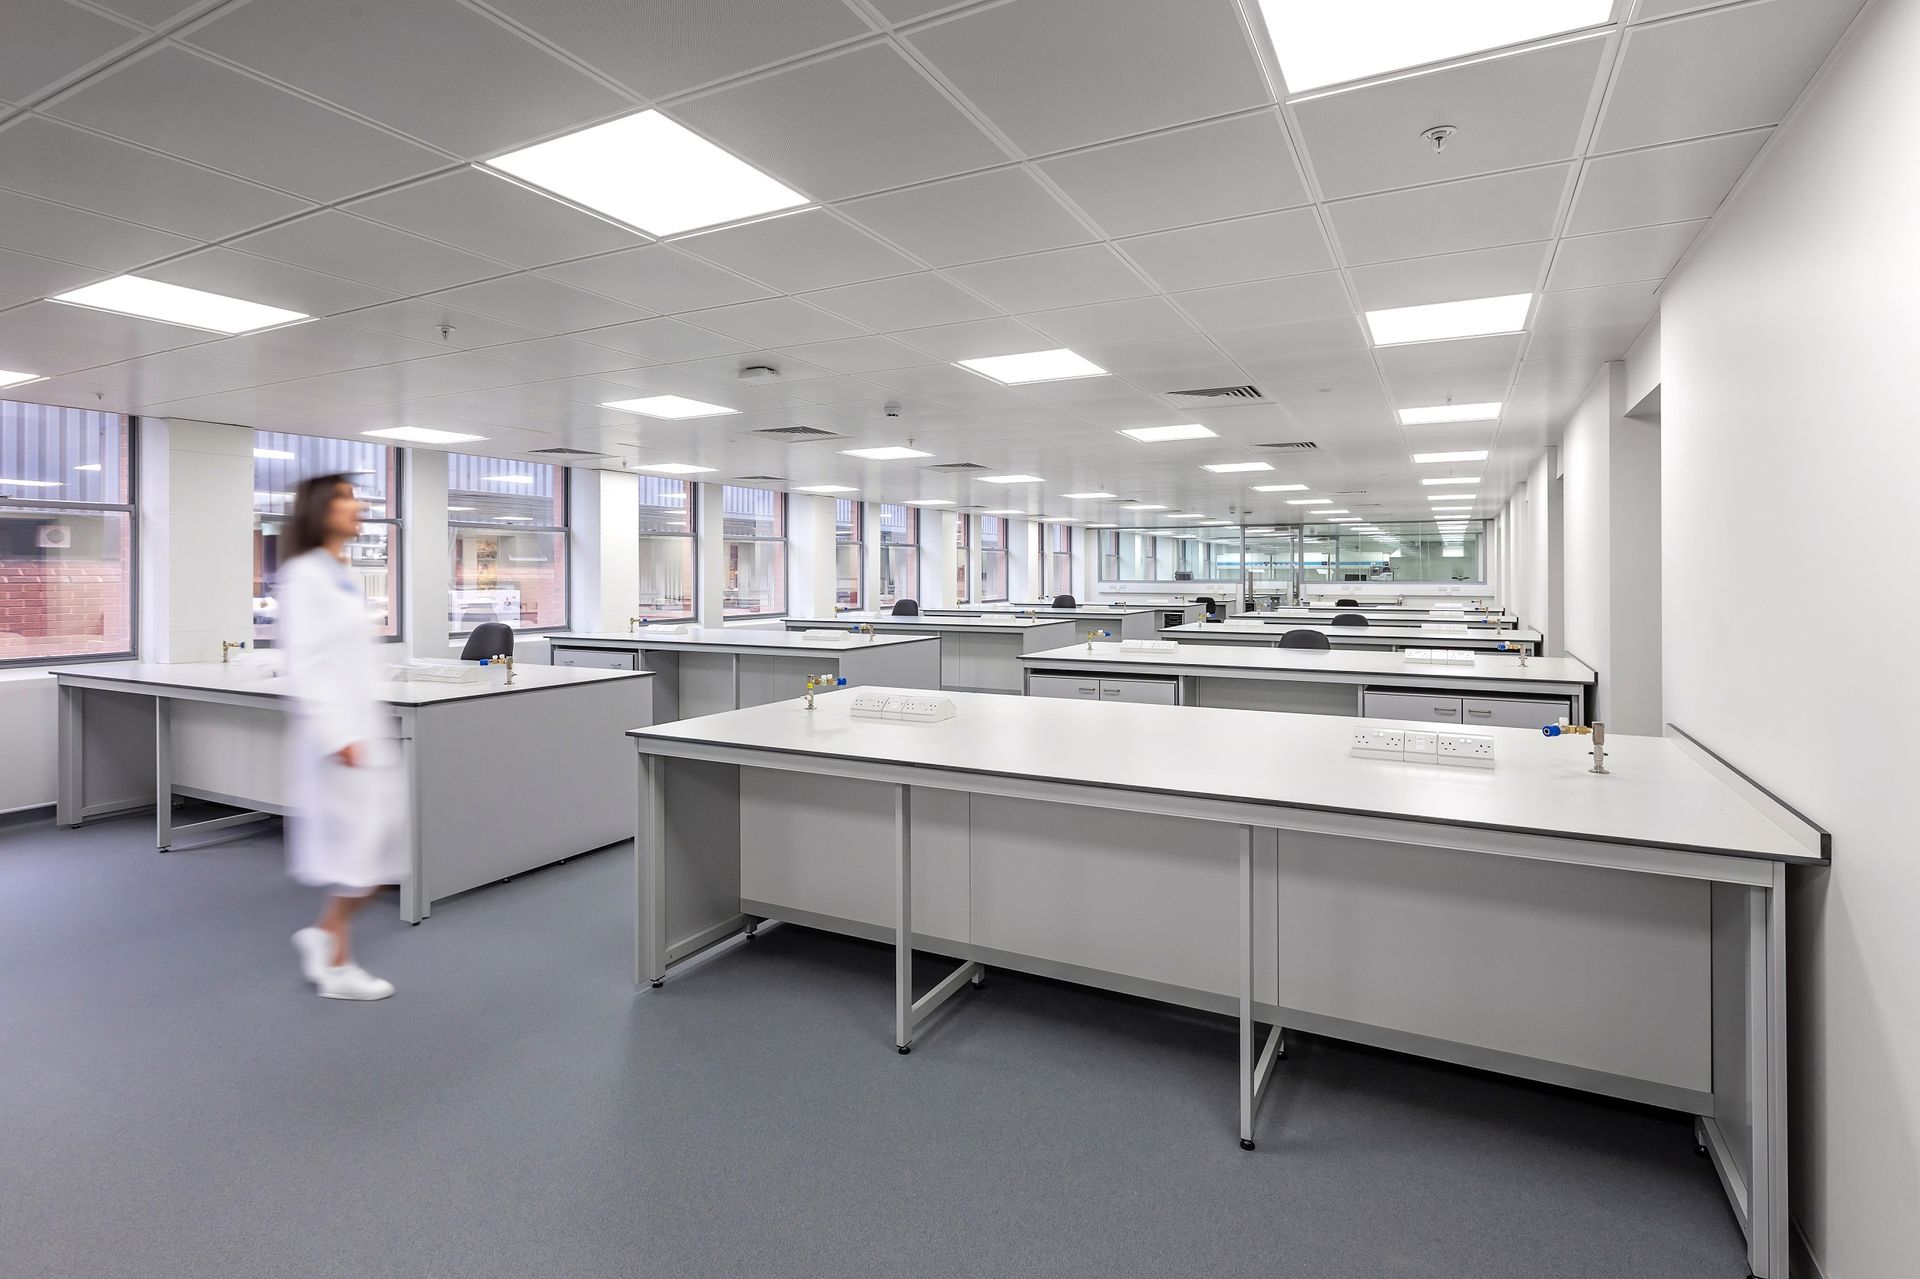 A woman in a lab coat is walking through a large room filled with desks.